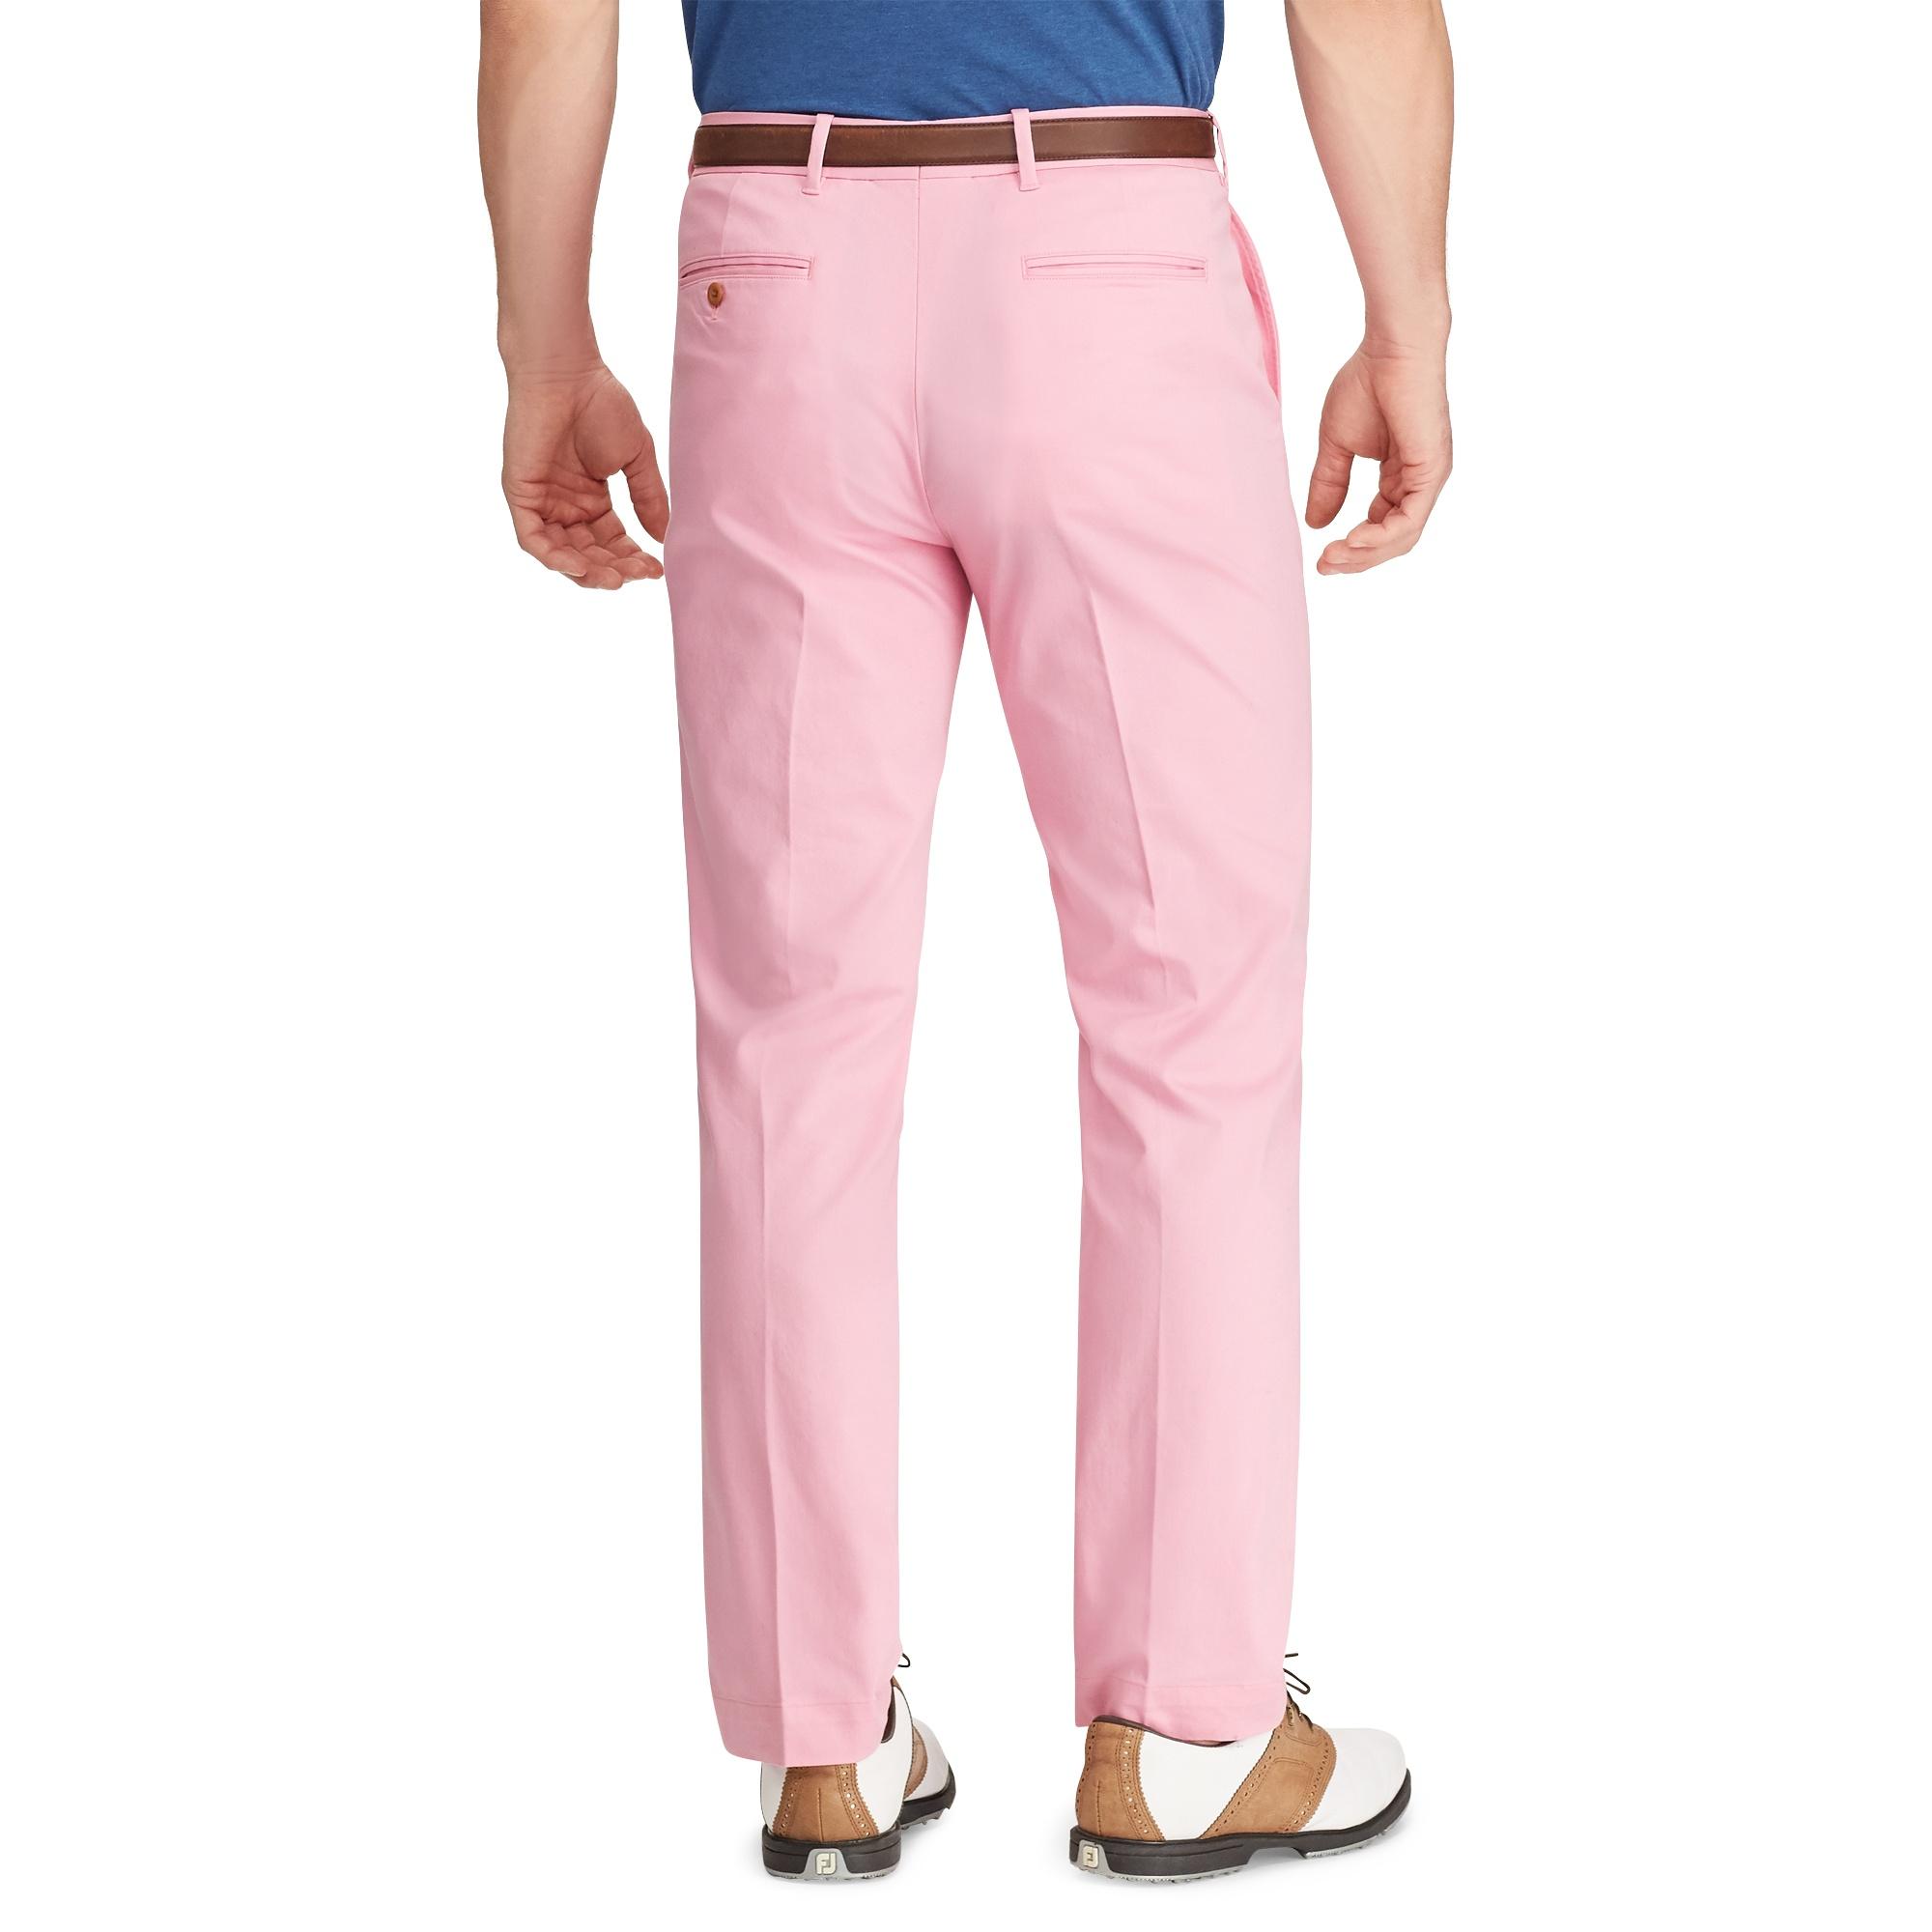 Ralph Lauren Cotton Tailored Fit Stretch Golf Pant in Pink Flamingo (Pink)  for Men - Lyst